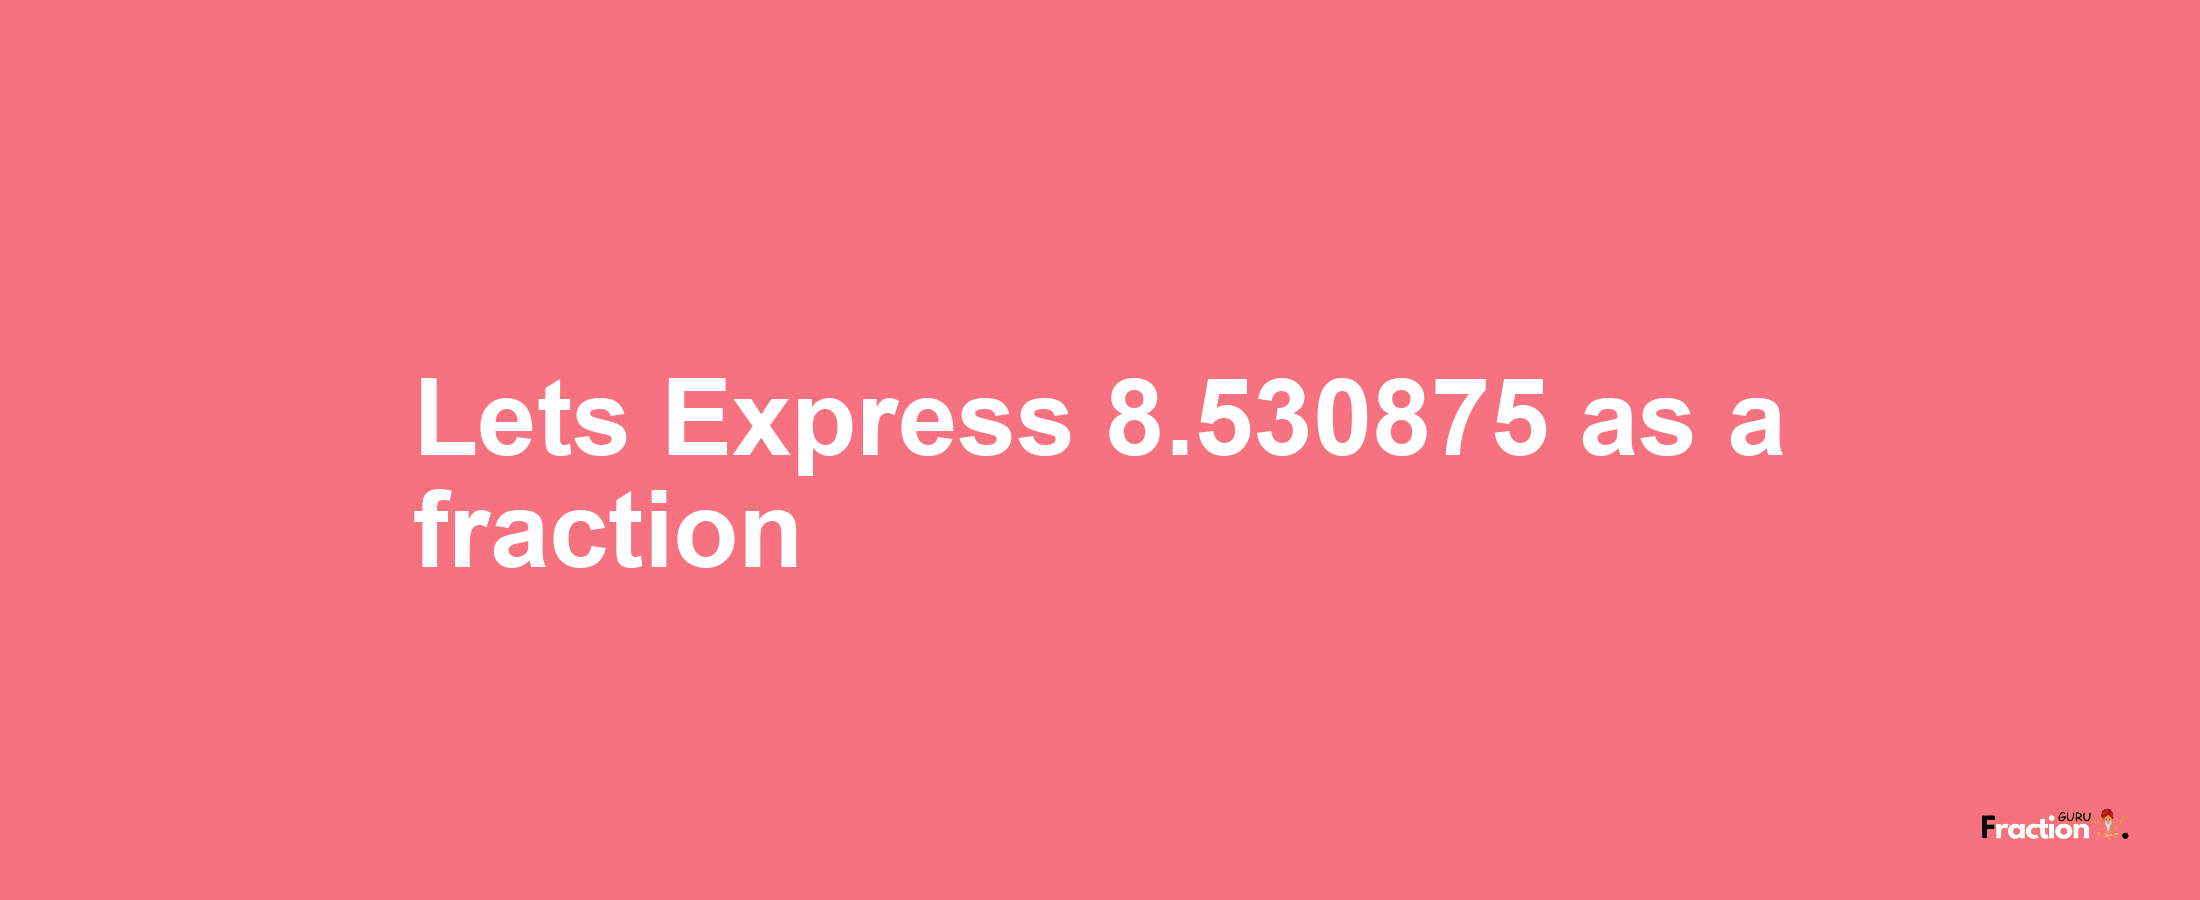 Lets Express 8.530875 as afraction